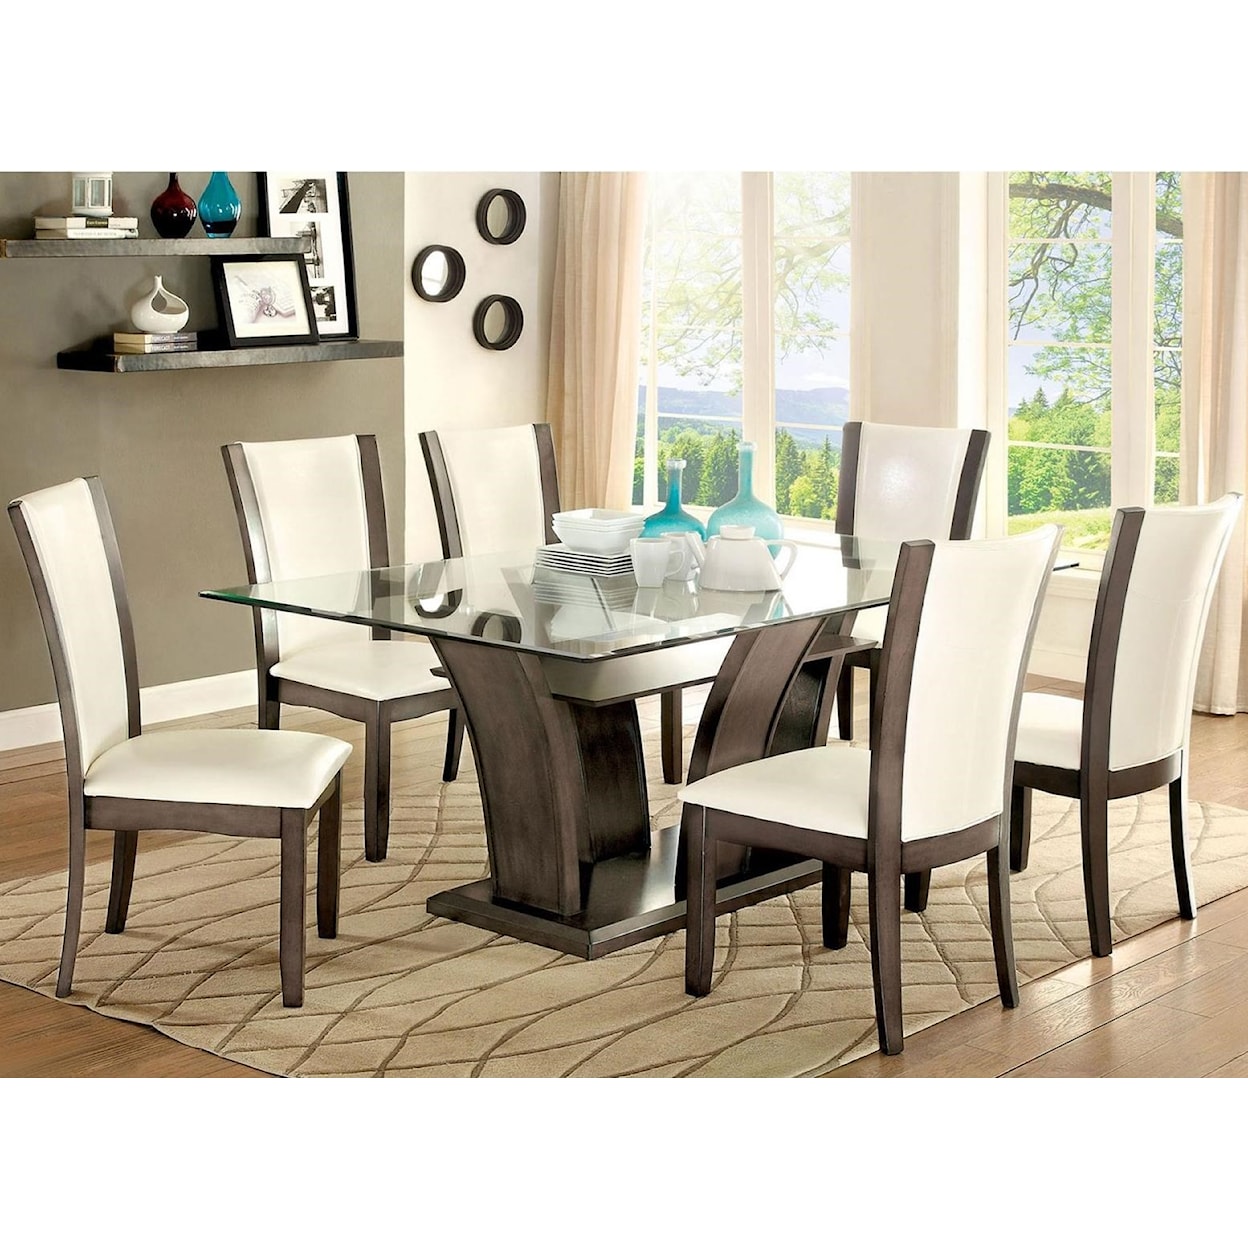 Furniture of America Manhattan I & II Table and 6 Side Chairs